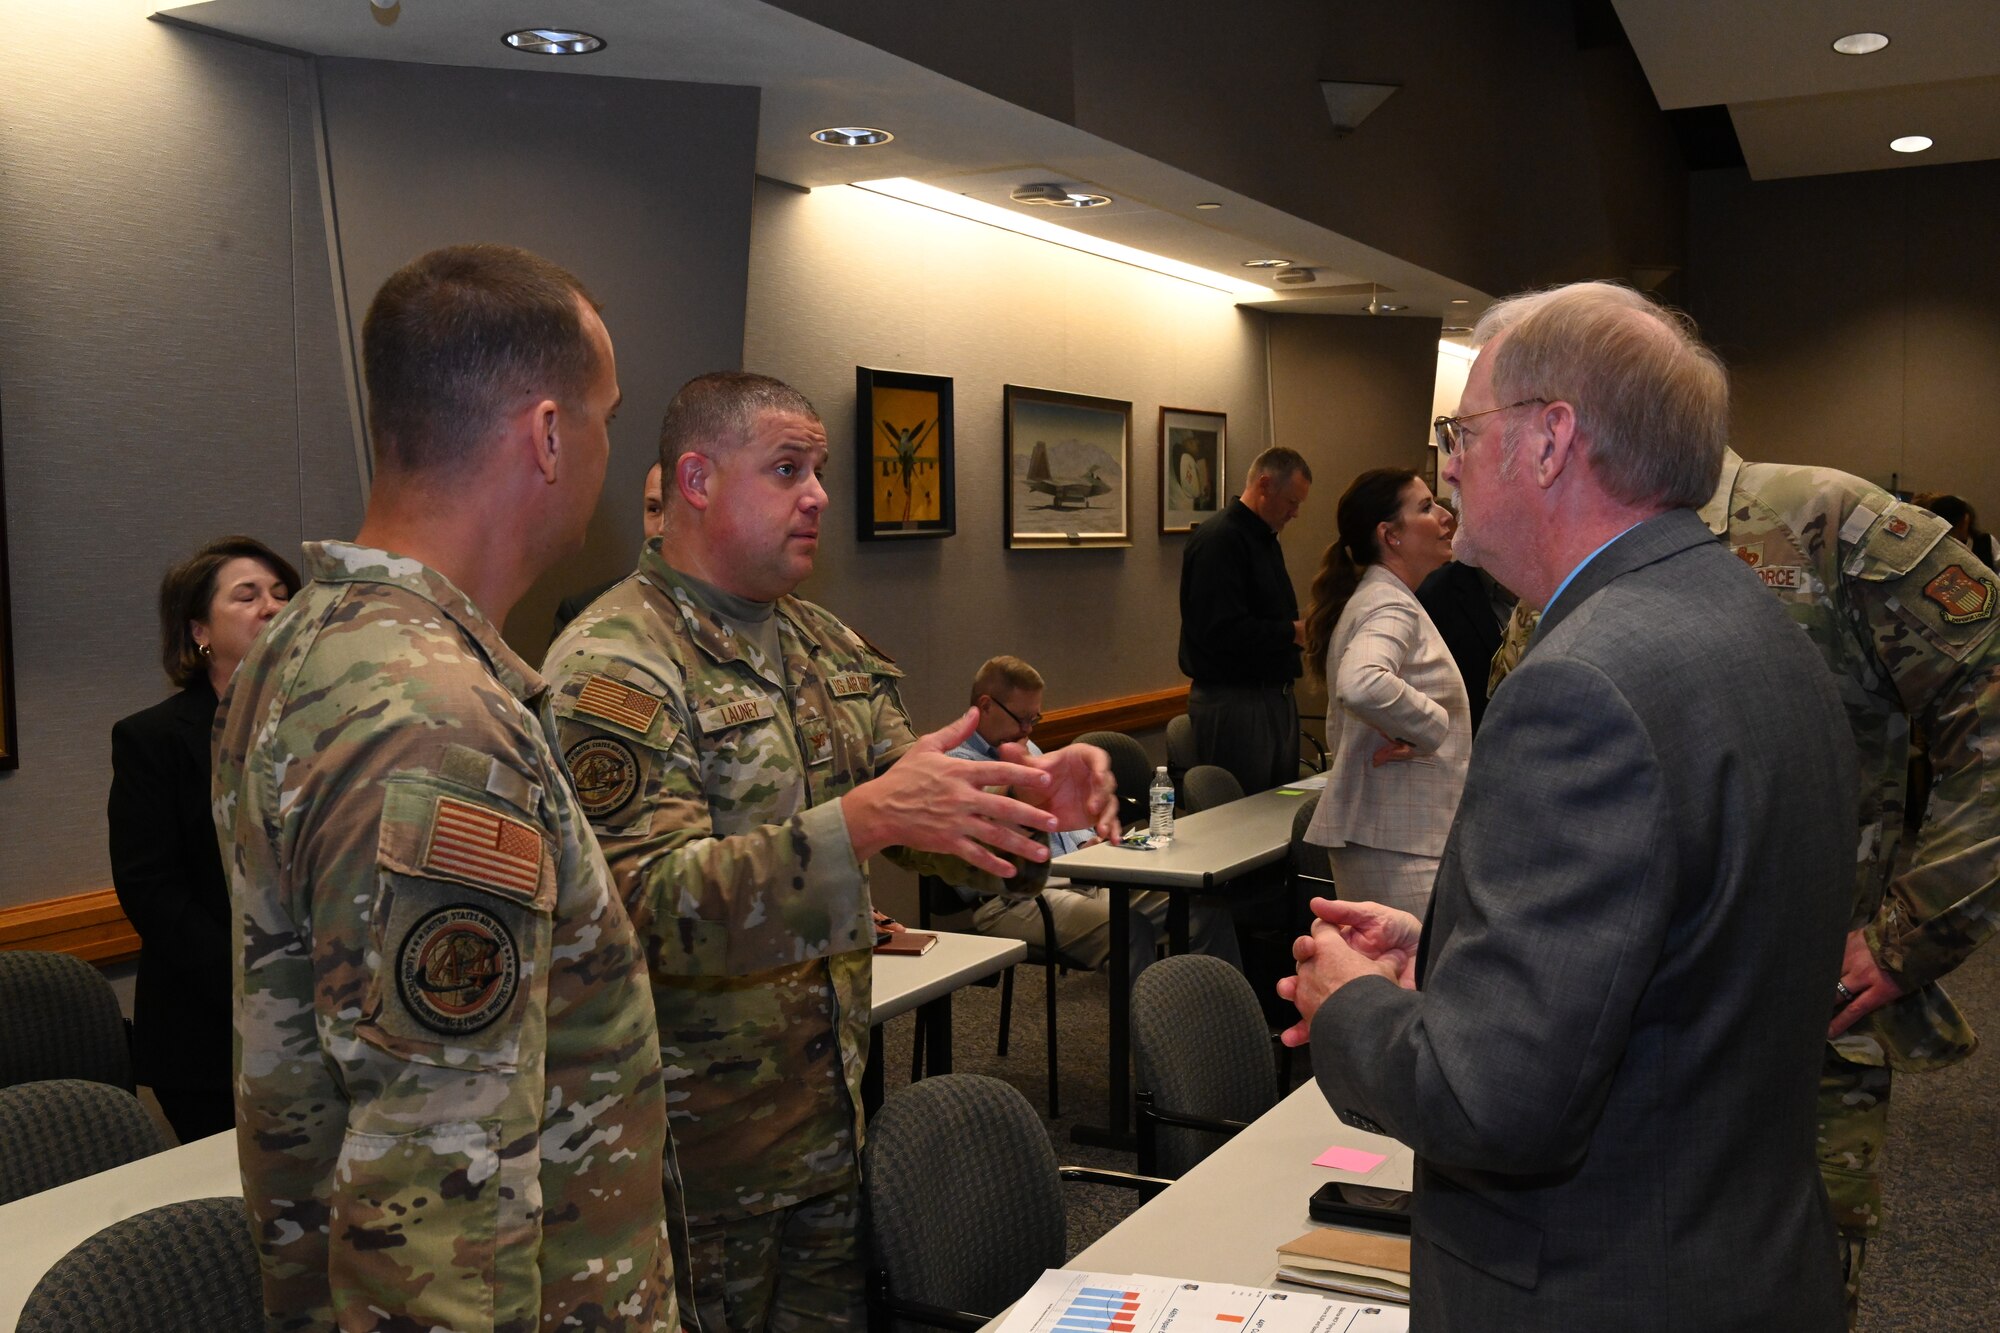 Photo of Airmen and a civilian having a discussion.